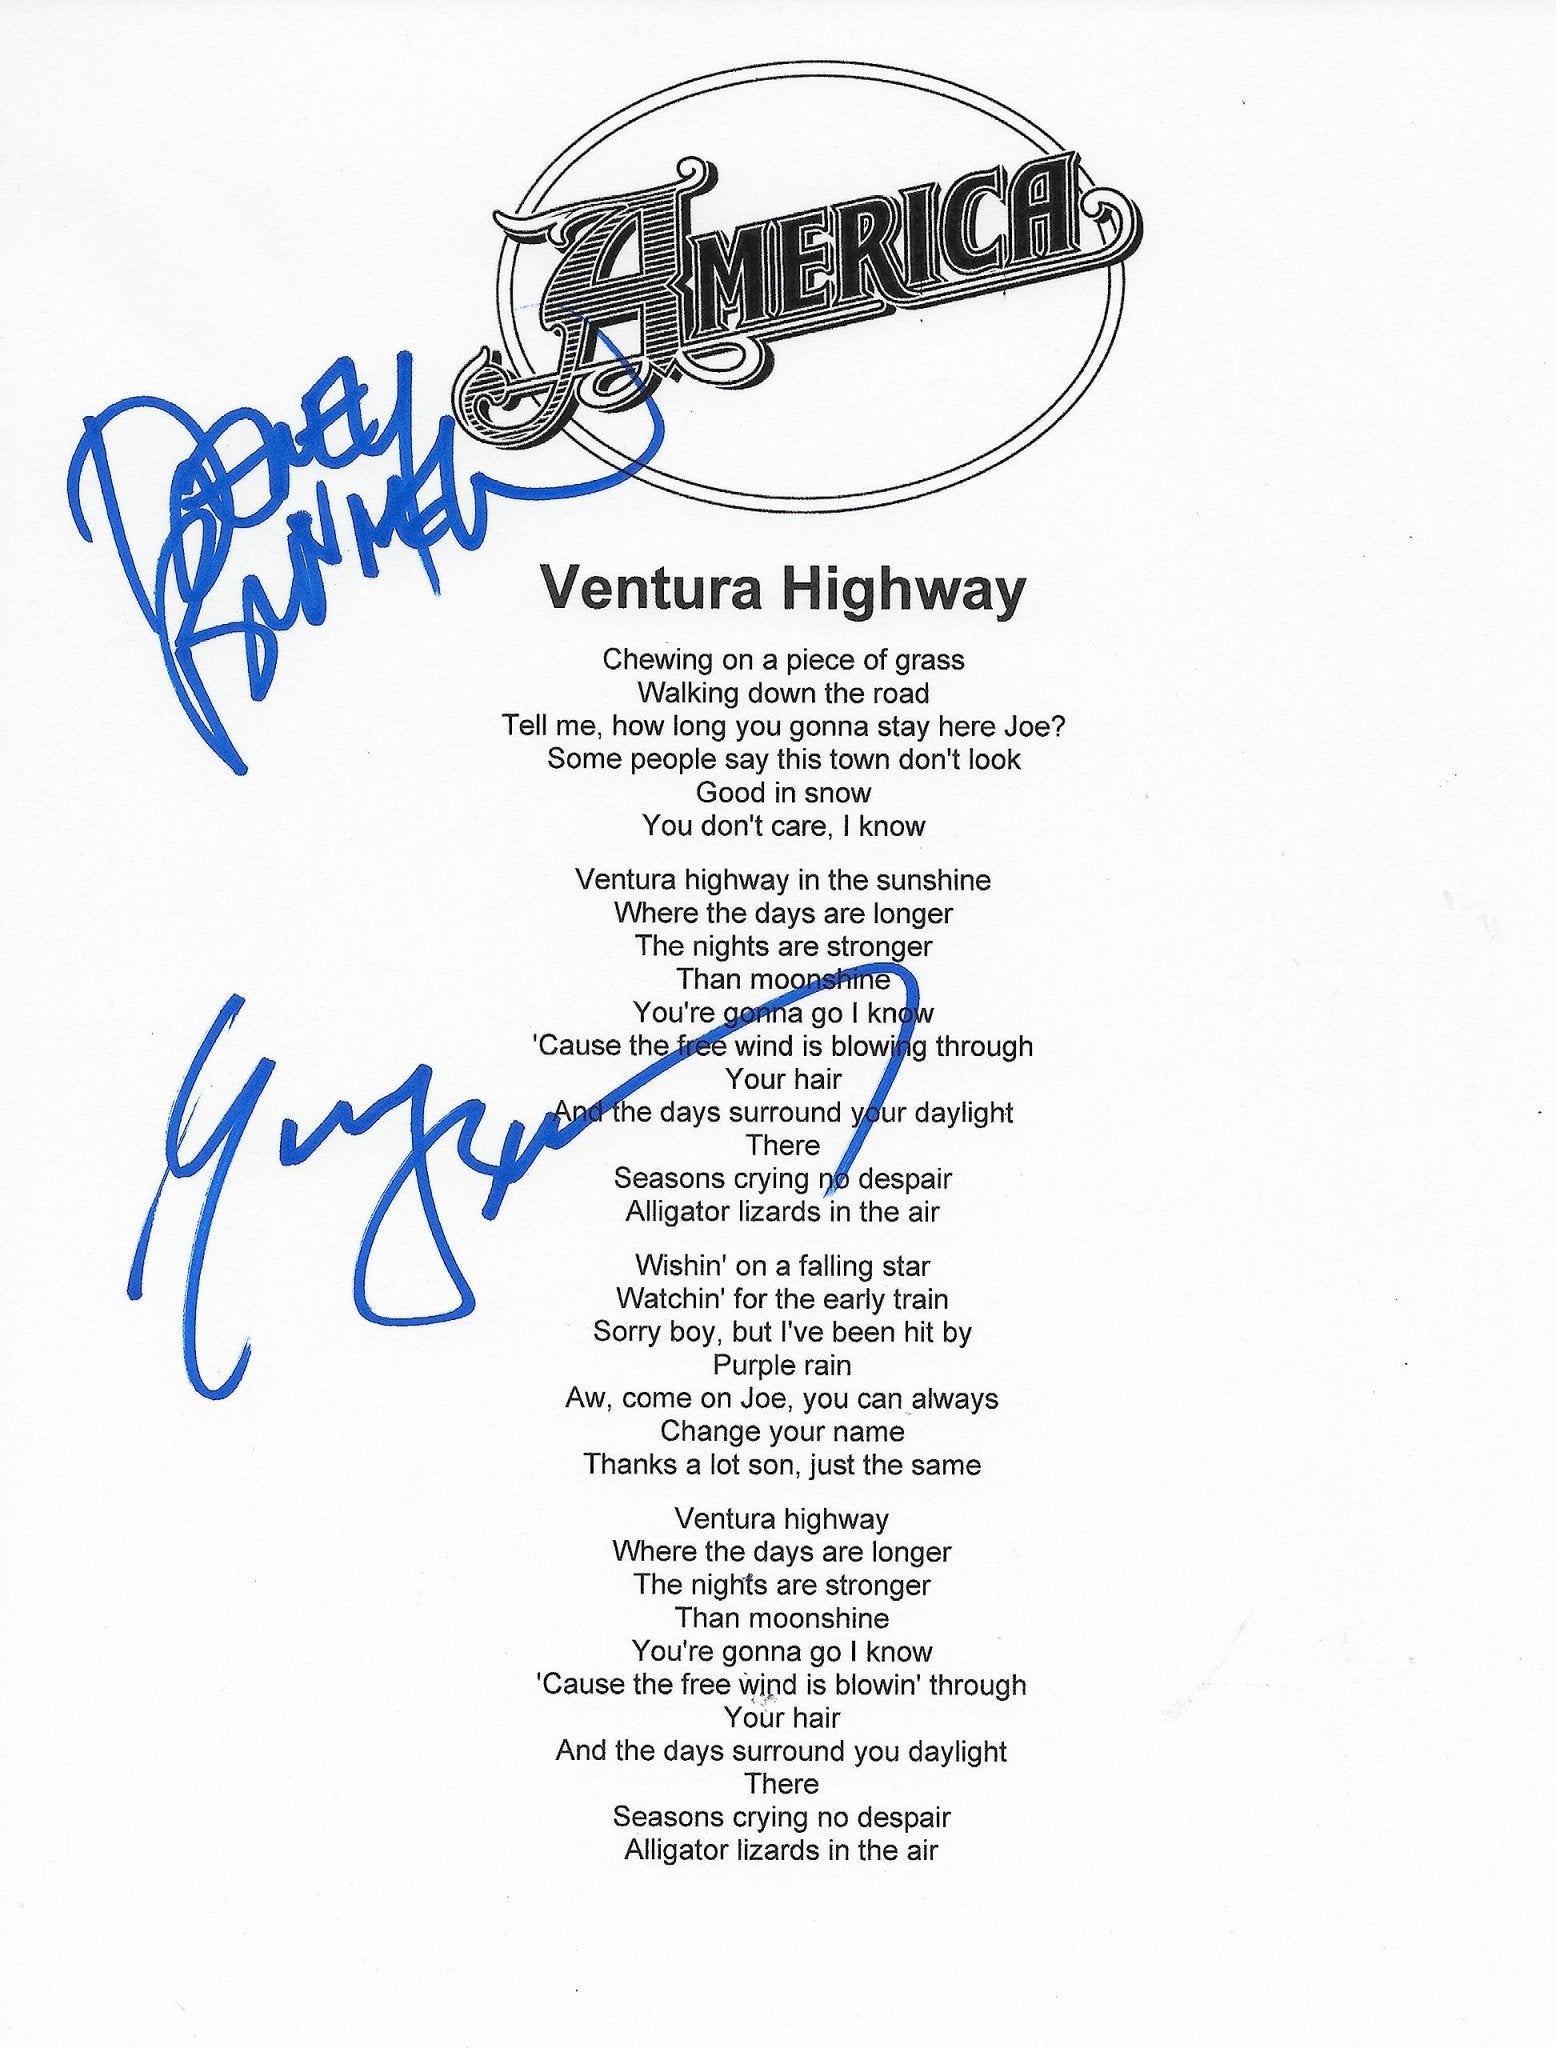 Way to Go - song and lyrics by Gerry Beckley